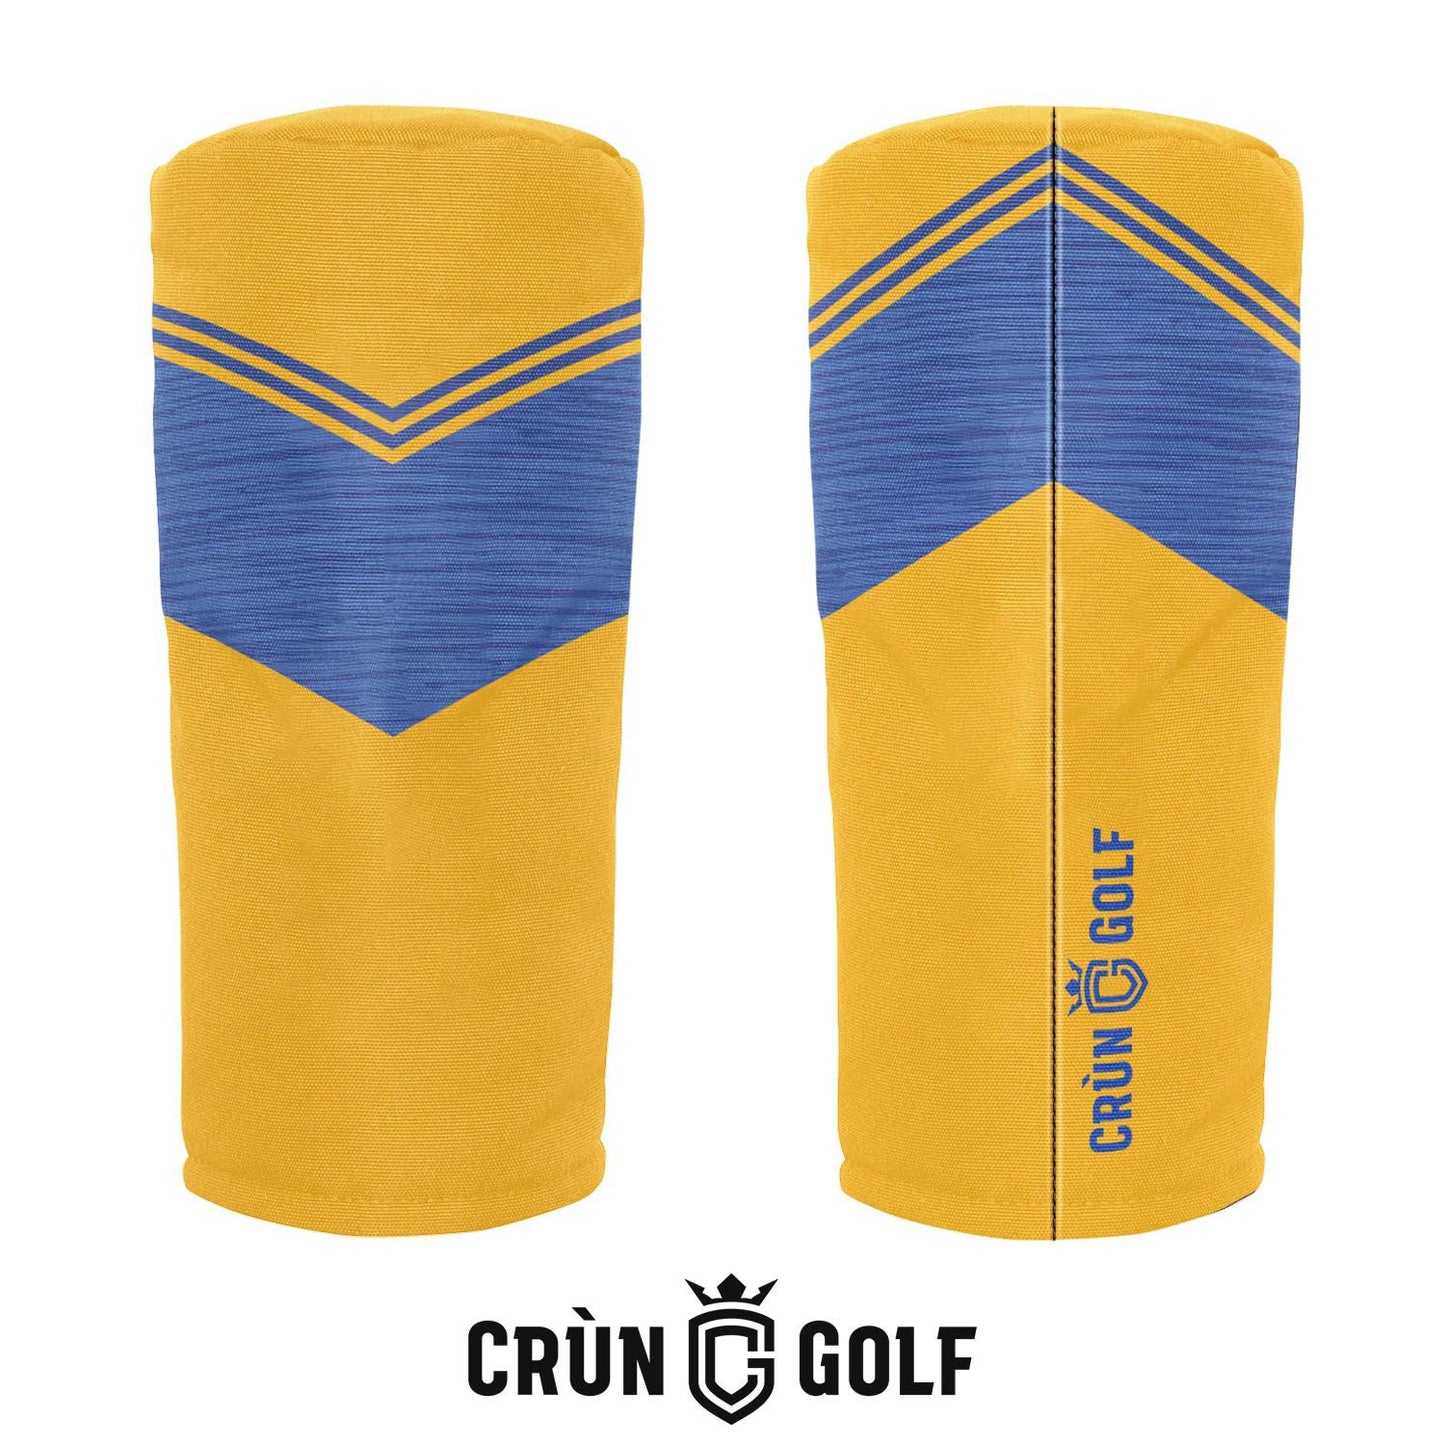 Stags Headcover - 2019 Home